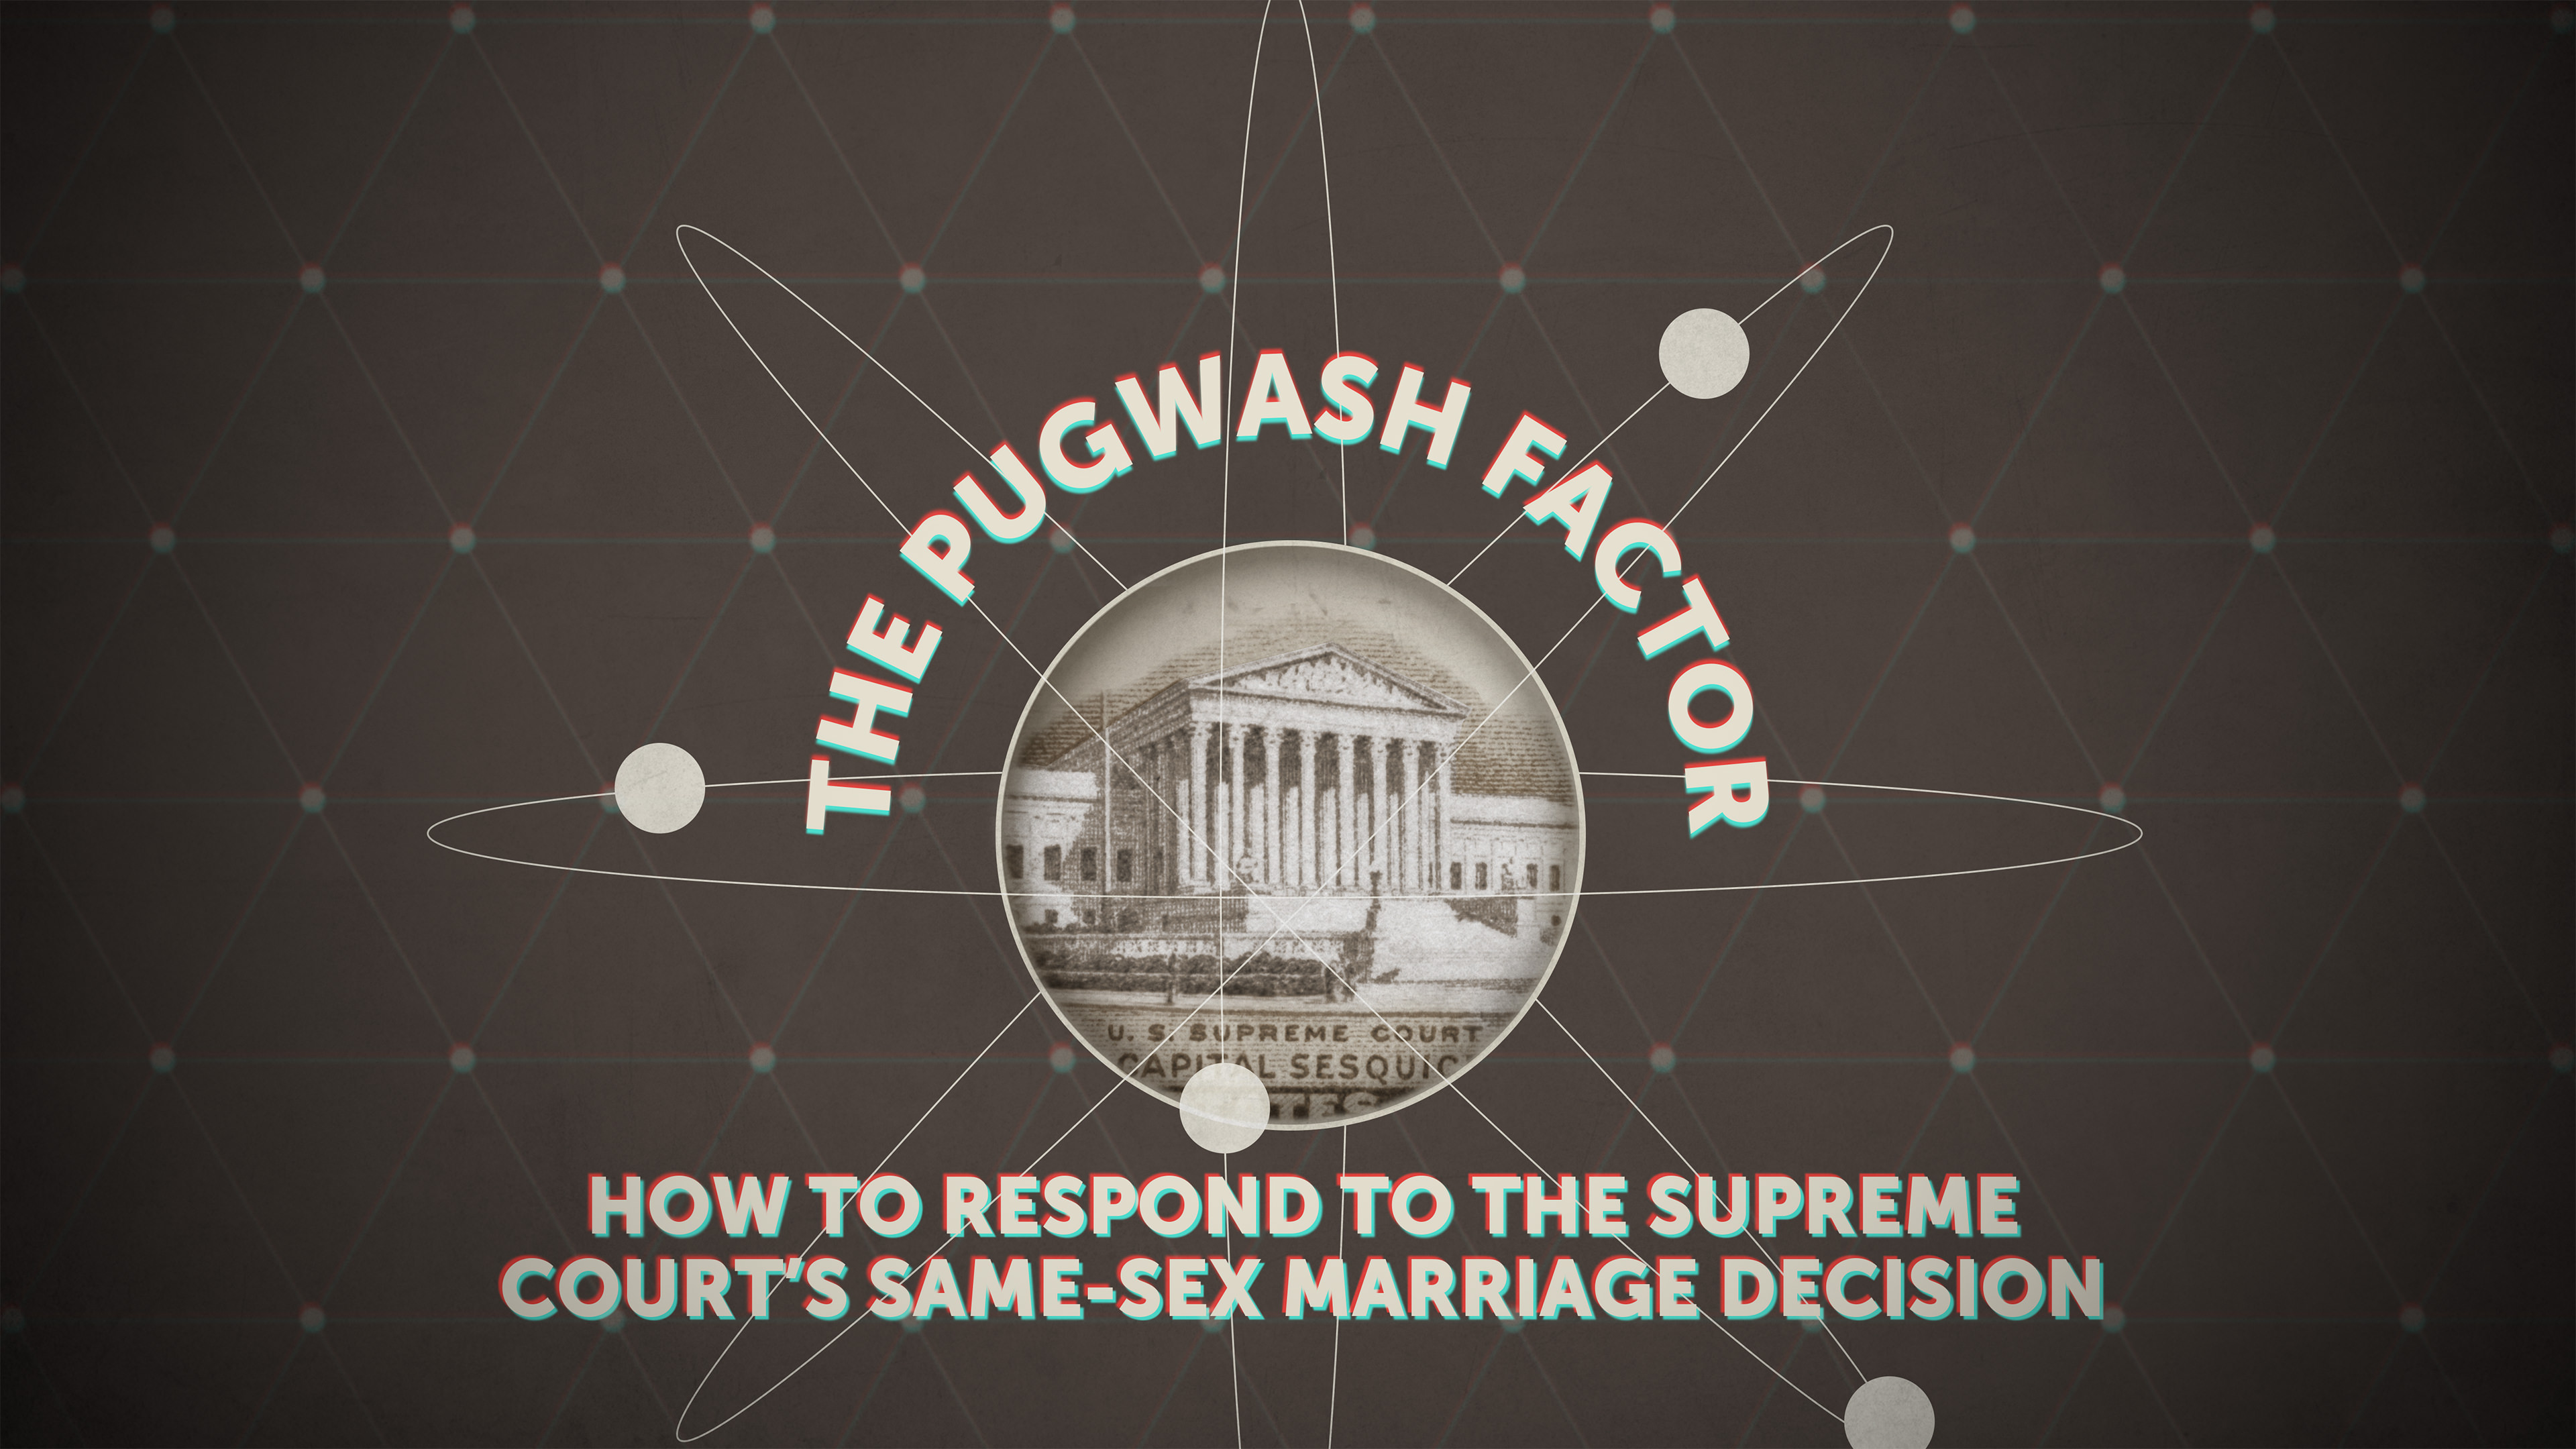 How to Respond to the Supreme Court's Same-Sex Marriage Decision